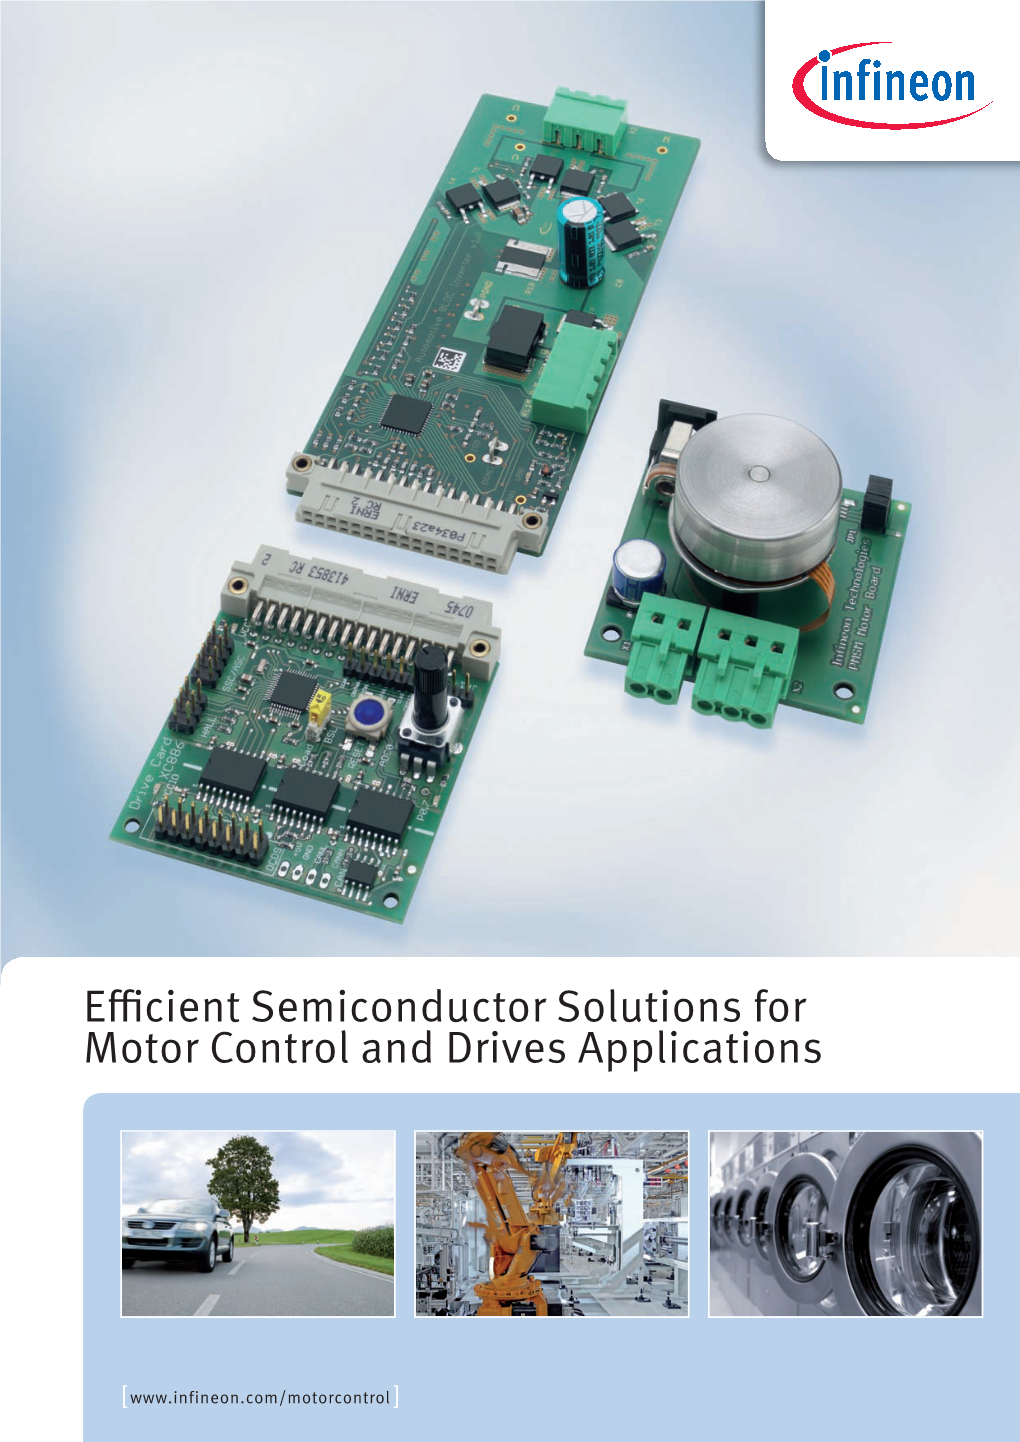 Efficient Semiconductor Solutions for Motor Control and Drives Applications